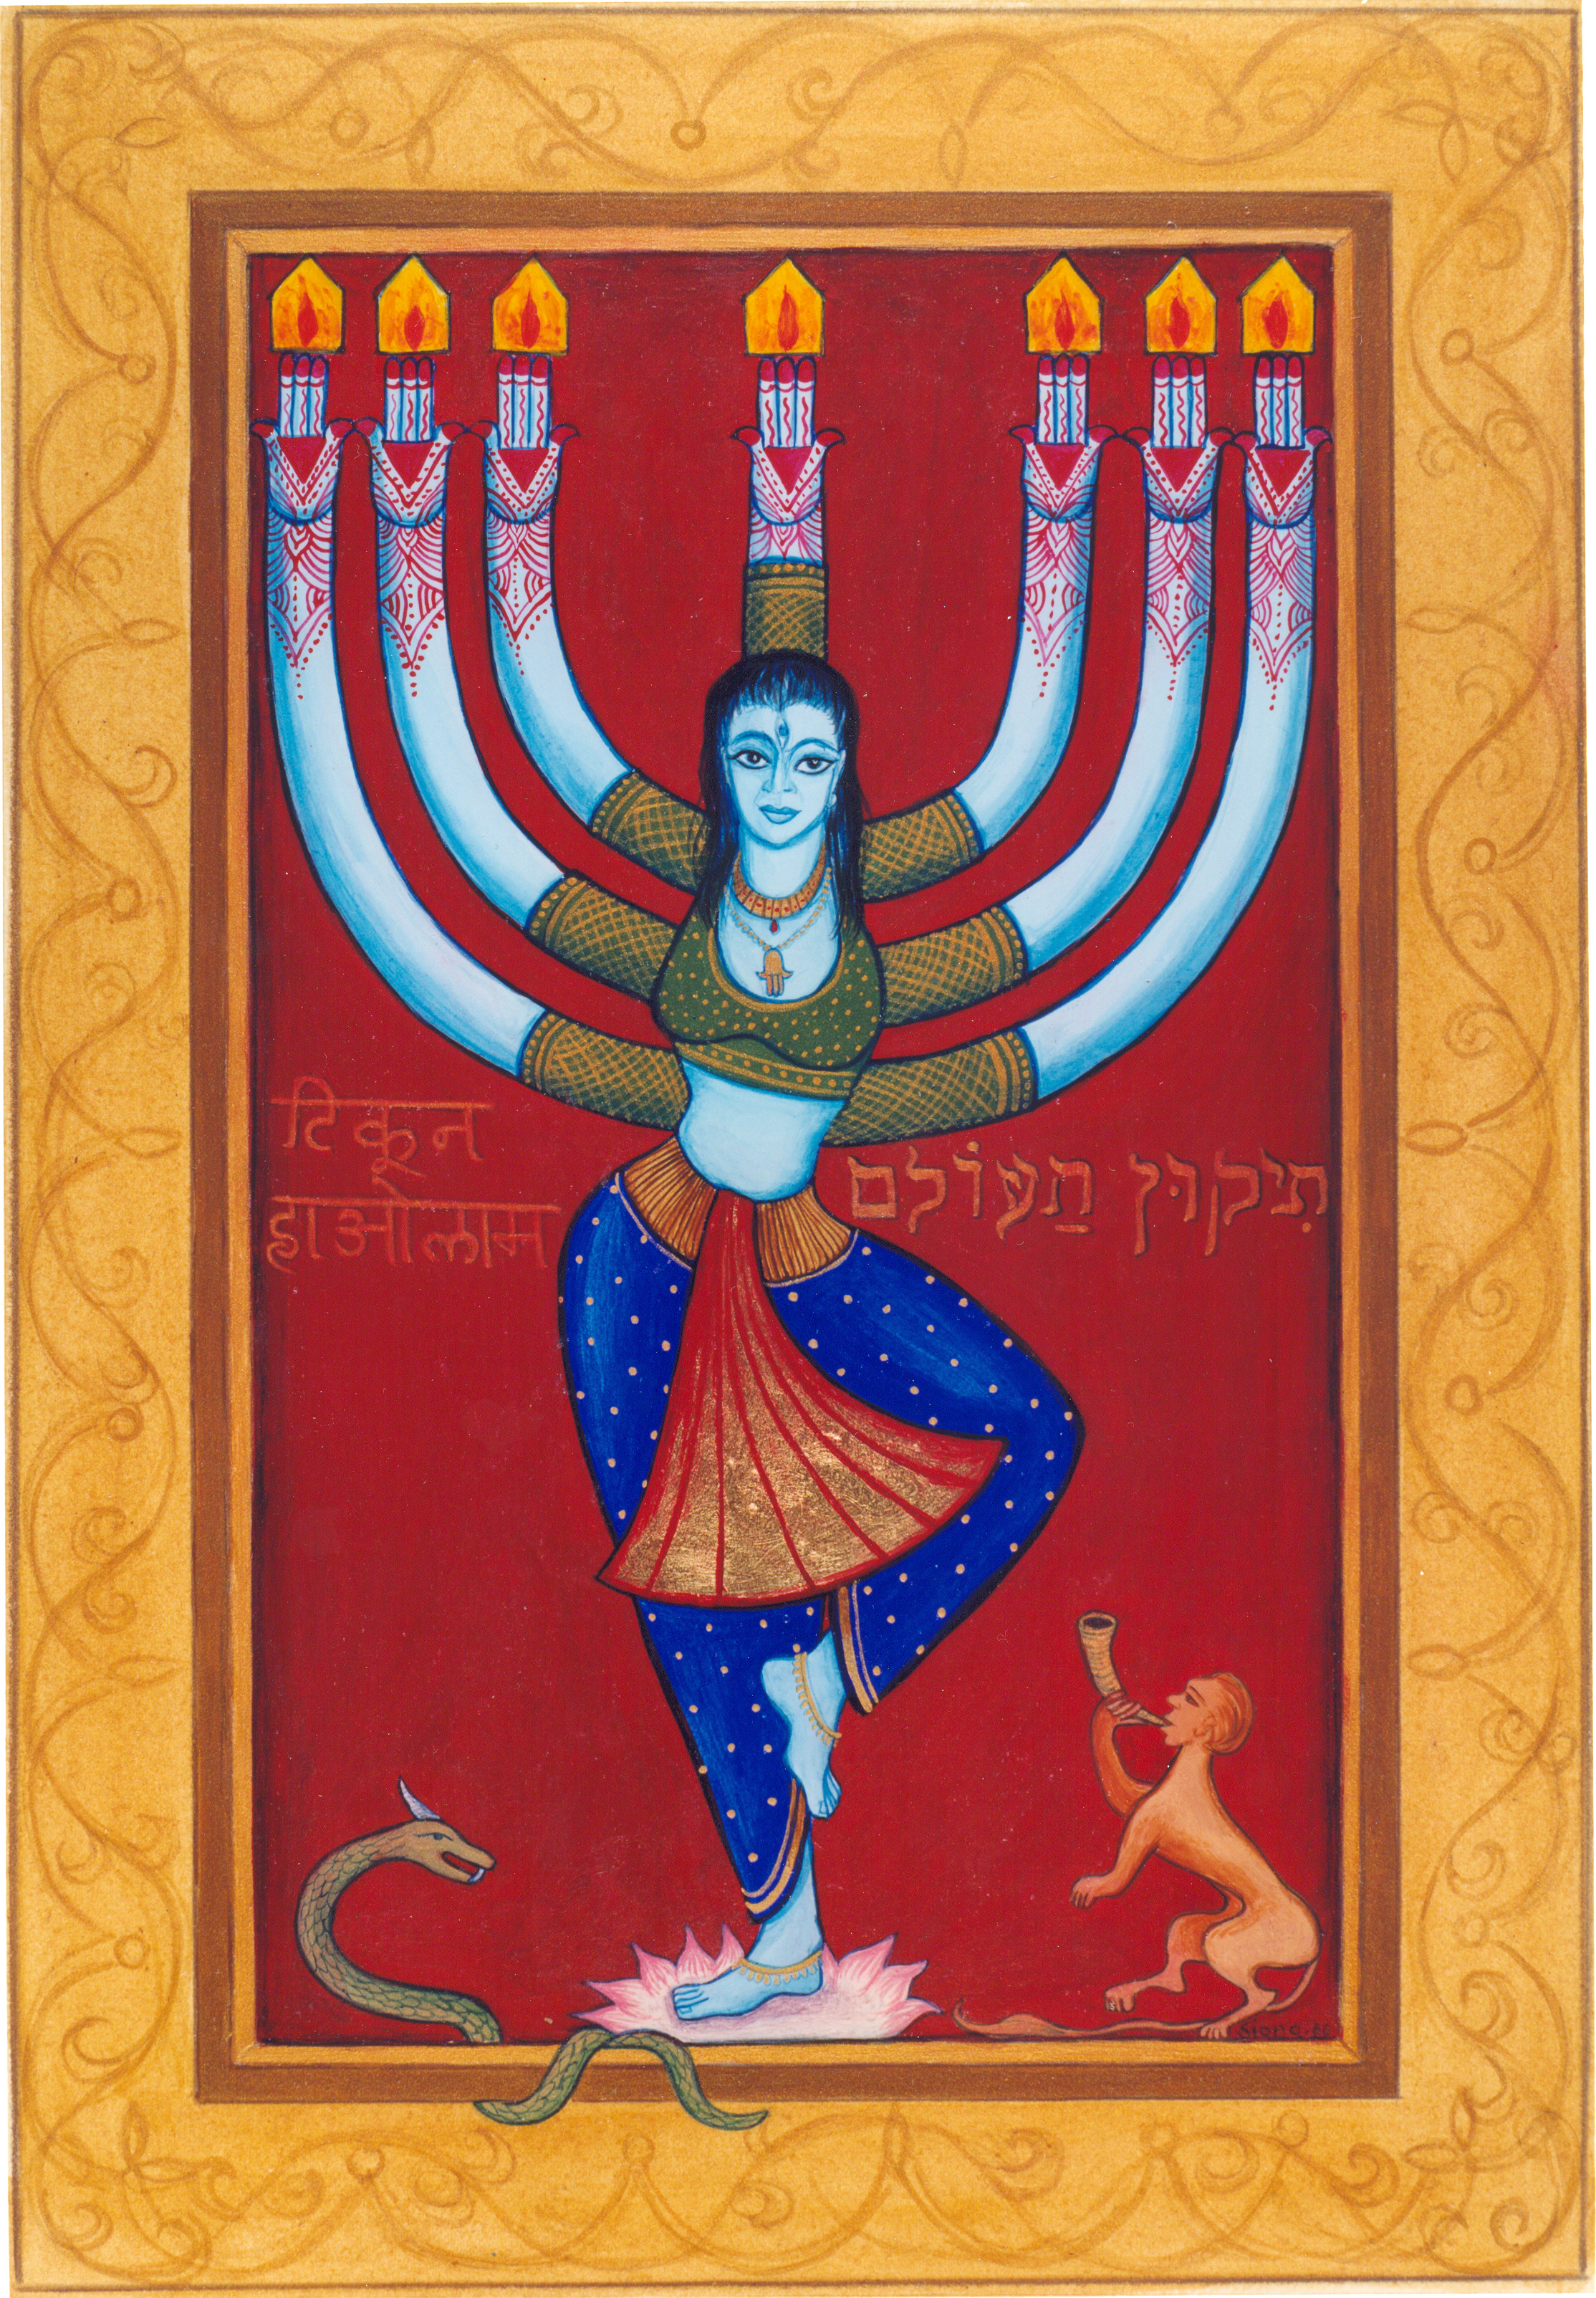 Photograph of the painting Tikkun Olam described in the text.